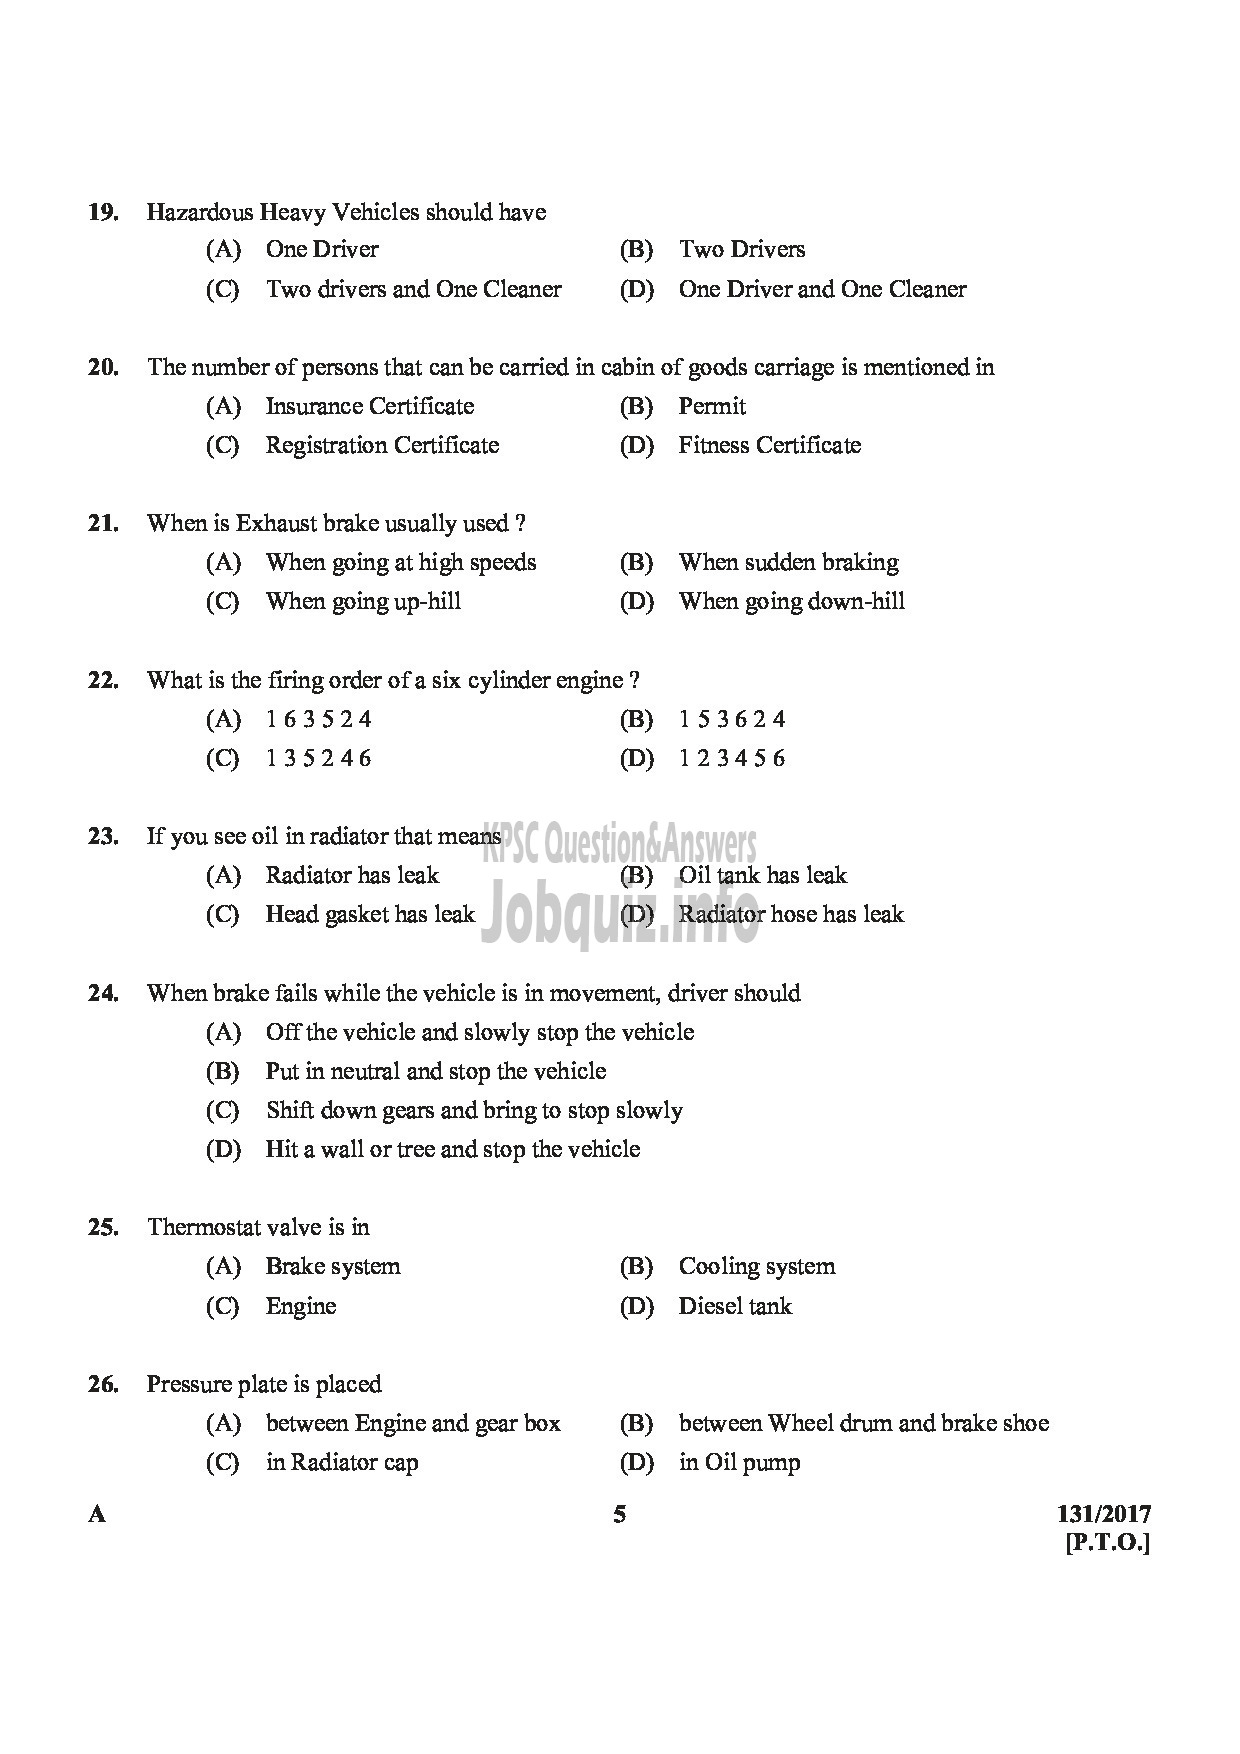 Kerala PSC Question Paper - FIREMAN DRIVER CUM PUMP OPERATOR TRAINEE SR FROM AMONG SC/ST ONLY FIRE AND RESCUE SERVICE-5